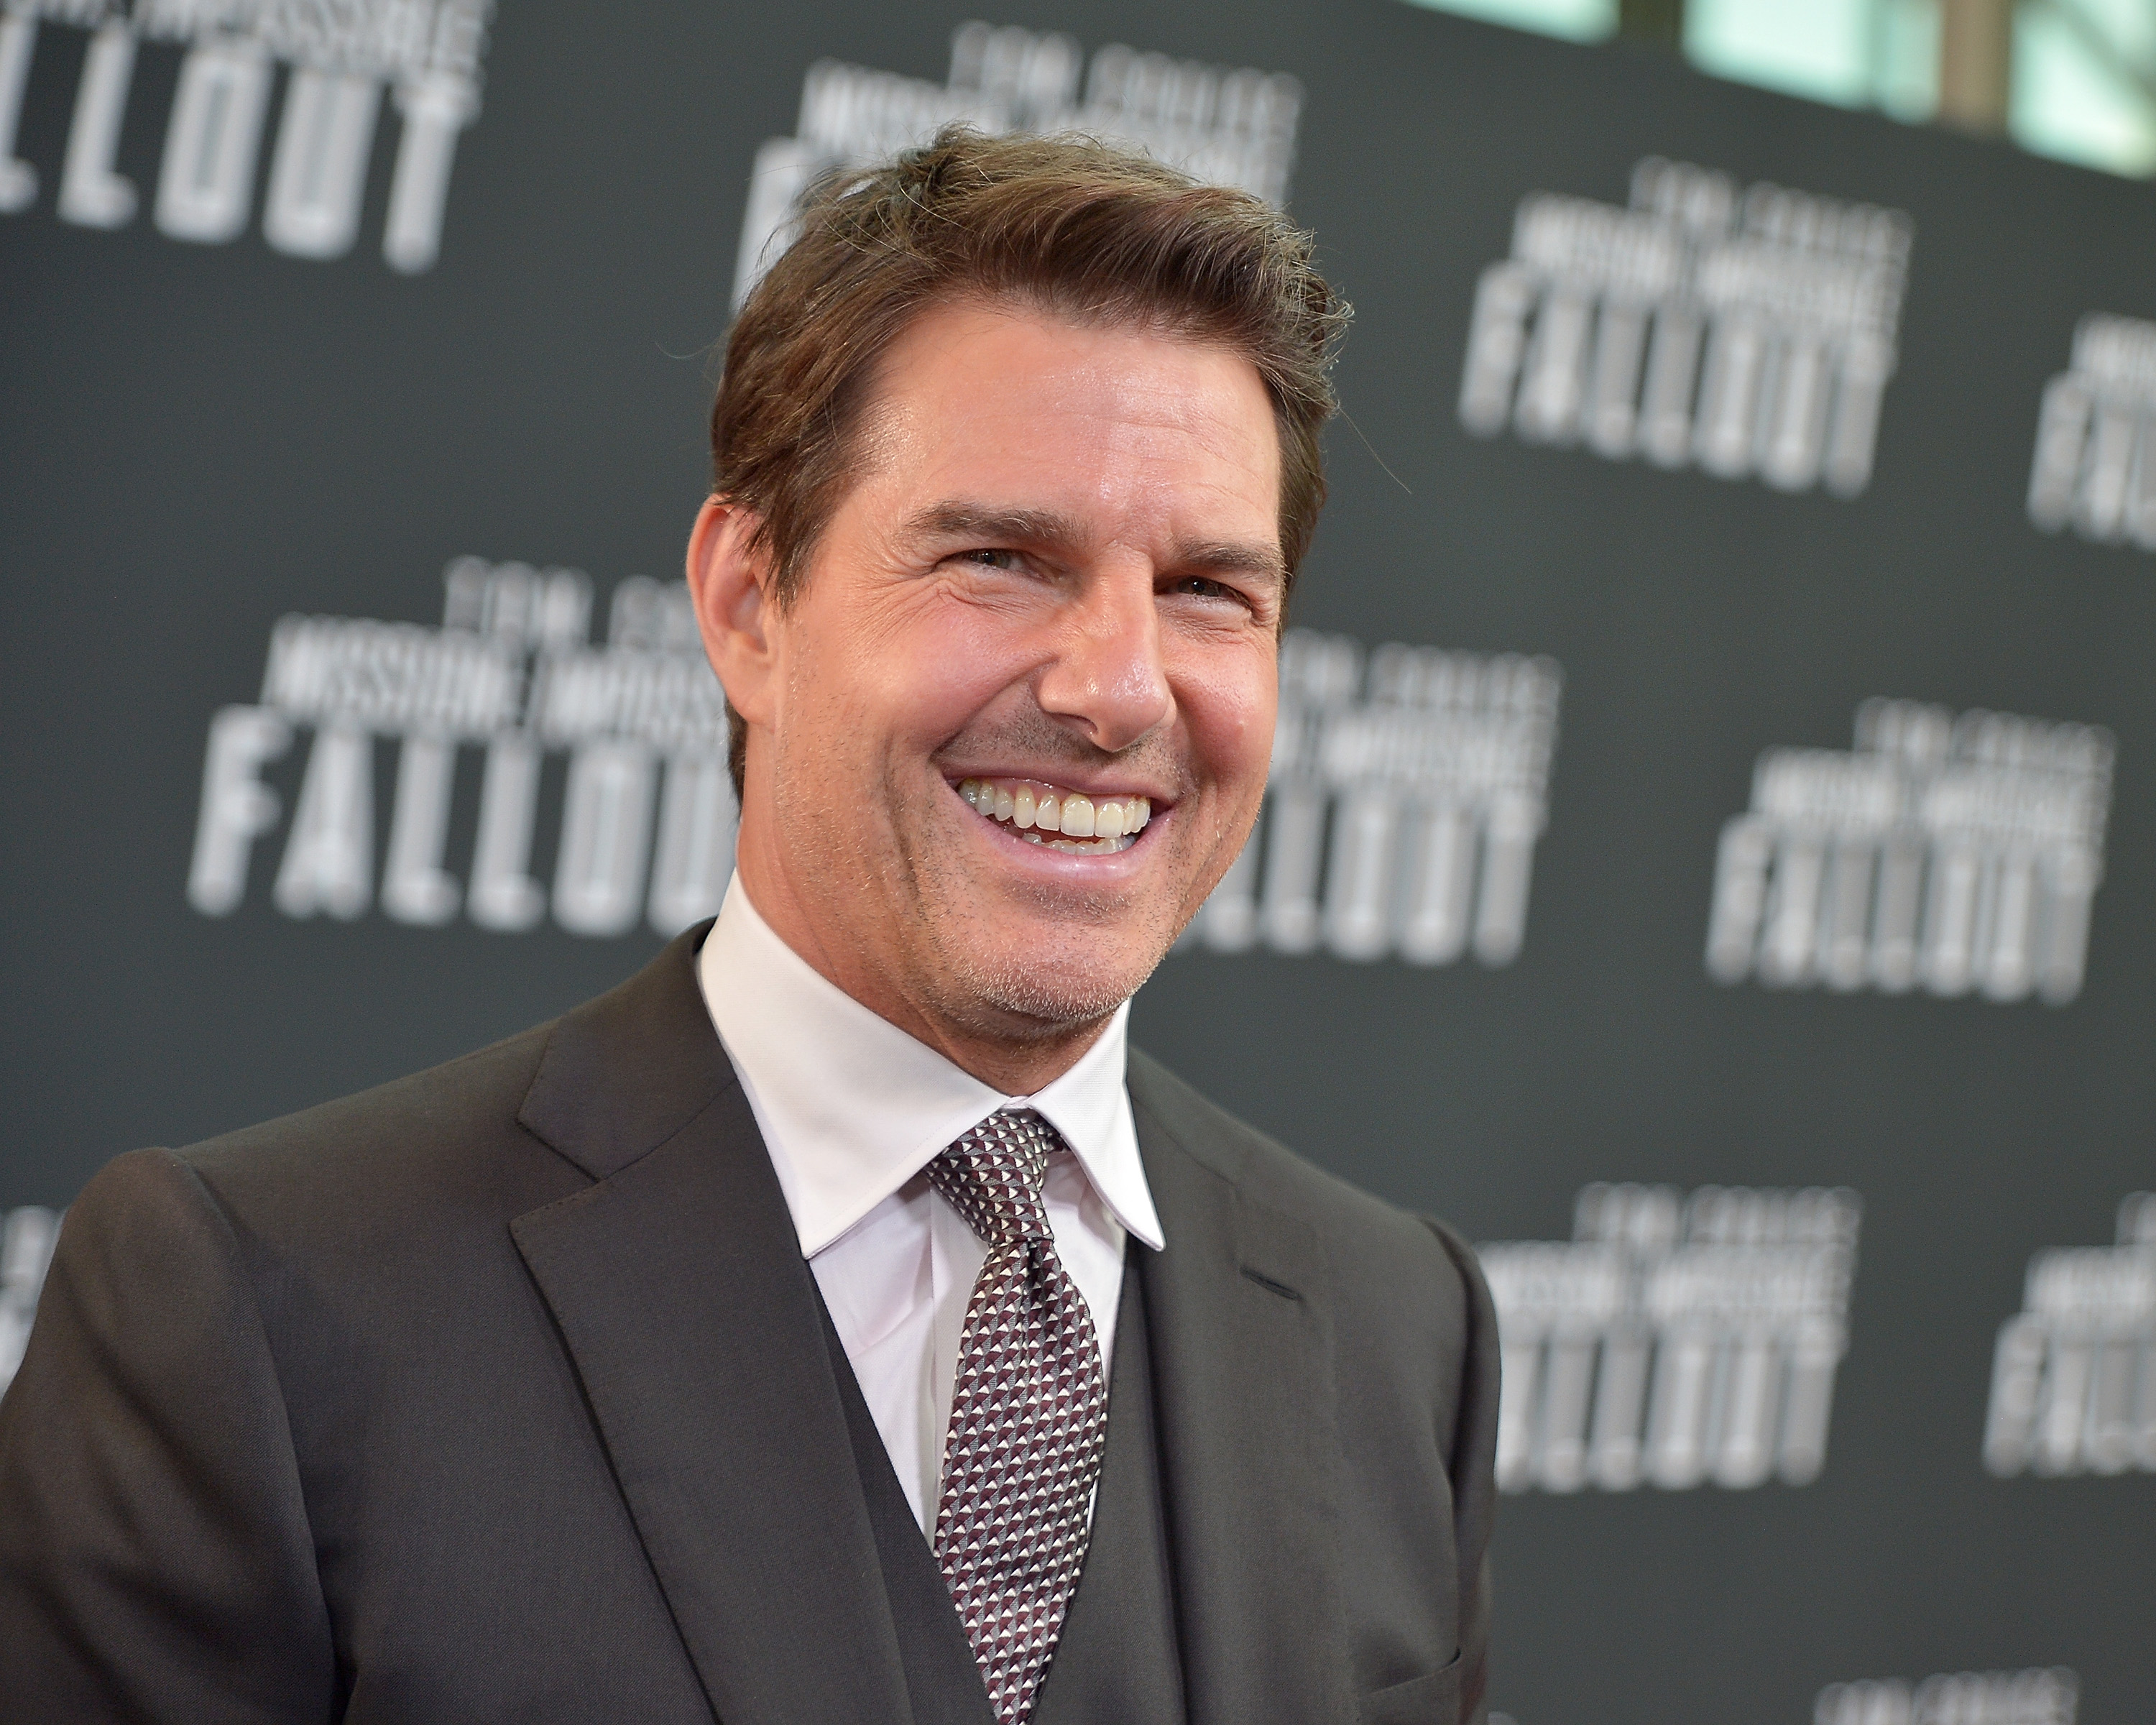 Tom Cruise attends the U.S. Premiere of 'Mission: Impossible - Fallout' at Smithsonian's National Air and Space Museum